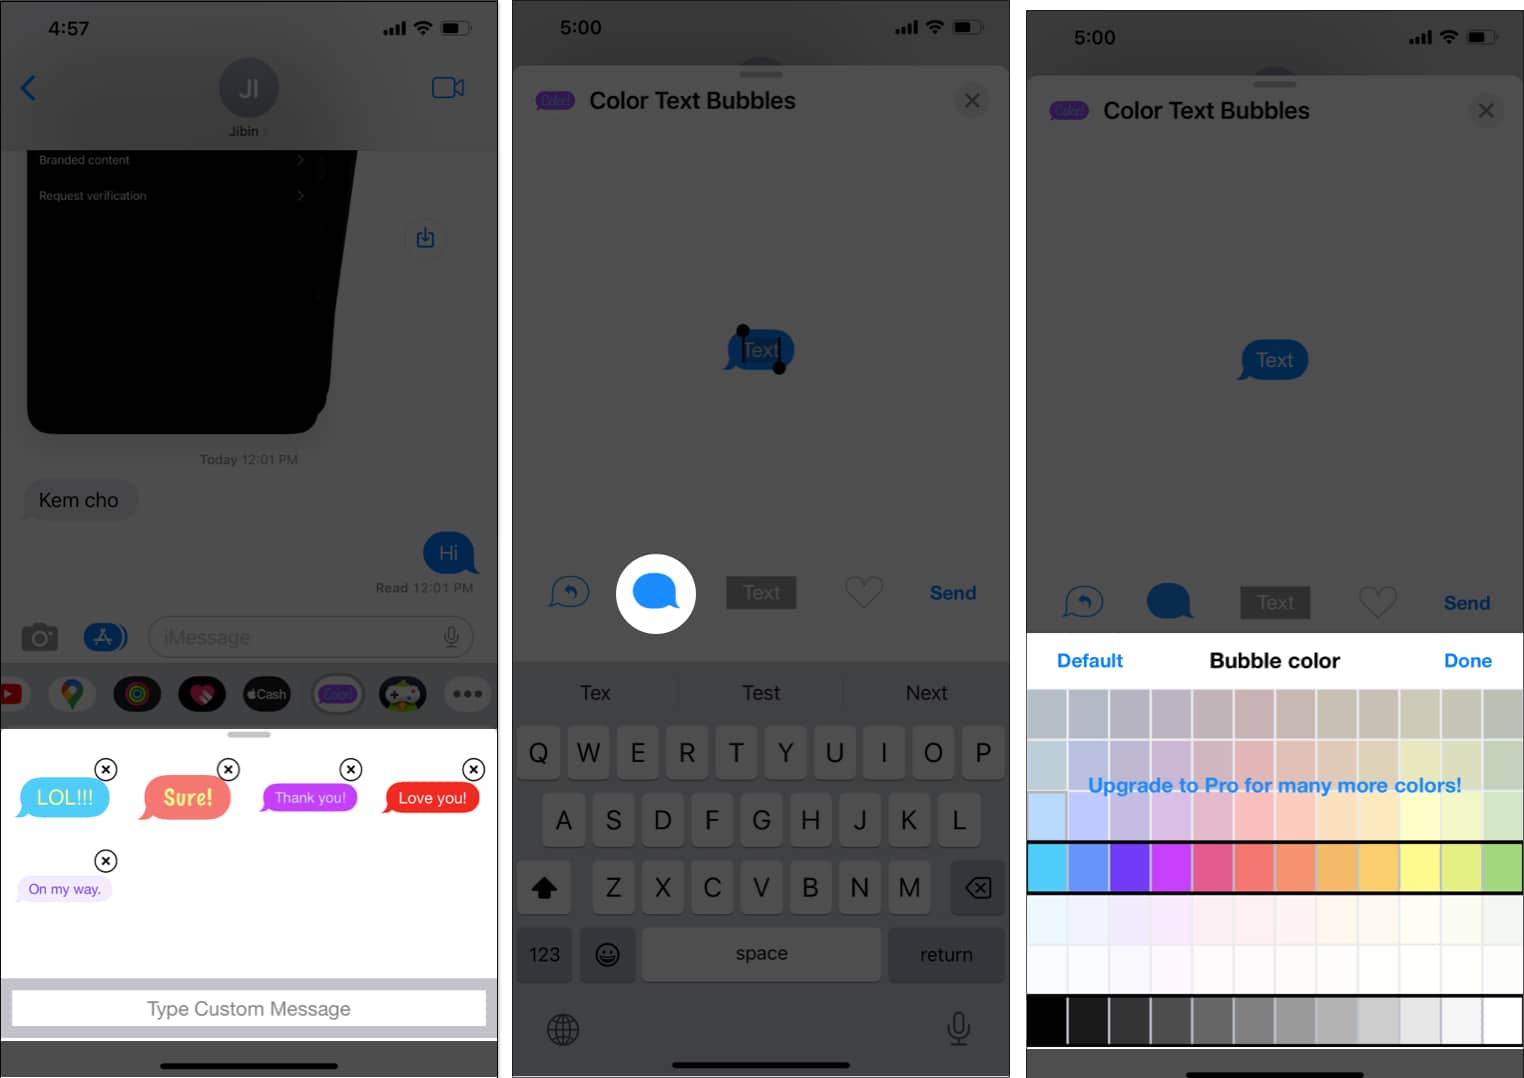 Choose a default Color Text Bubble to open it, or select Type Custom Message tap on the Bubble Color icon, and choose a color